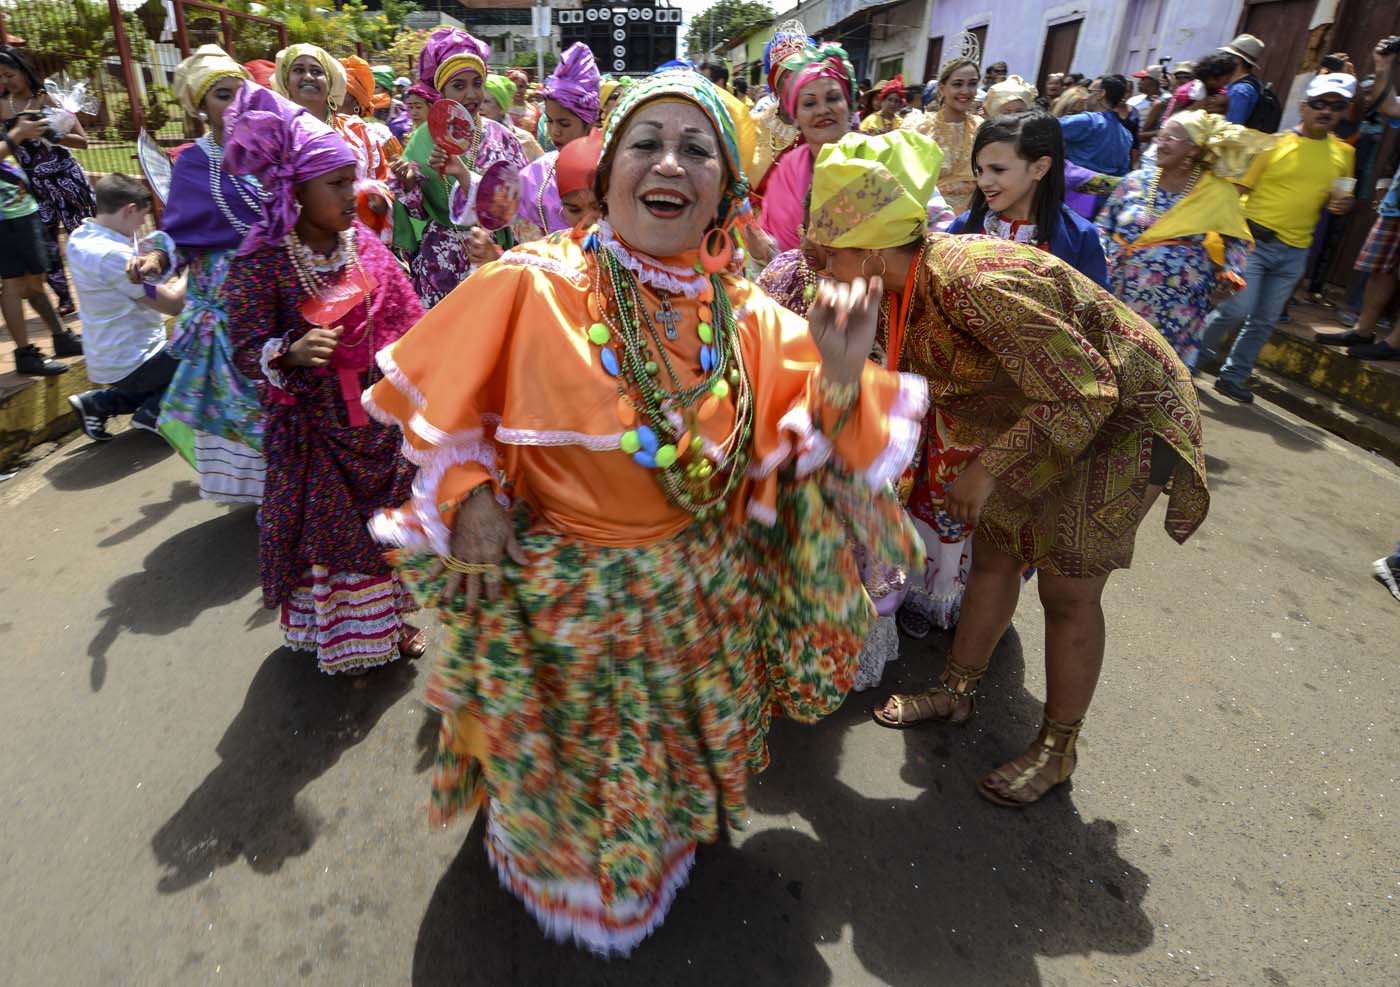 Women dressed as "madamas" dance as they take part in a parade during the Carnival in El Callao, Bolivar state, Venezuela on February 26, 2017.  El Callao's carnival was recently named Unesco's Intangible Cultural Heritage of Humanity and is led by the madamas, the pillars of Callaoense identity representing Antillean matrons considered the communicators of values, who dance and wear colourful dresses. / AFP PHOTO / JUAN BARRETO